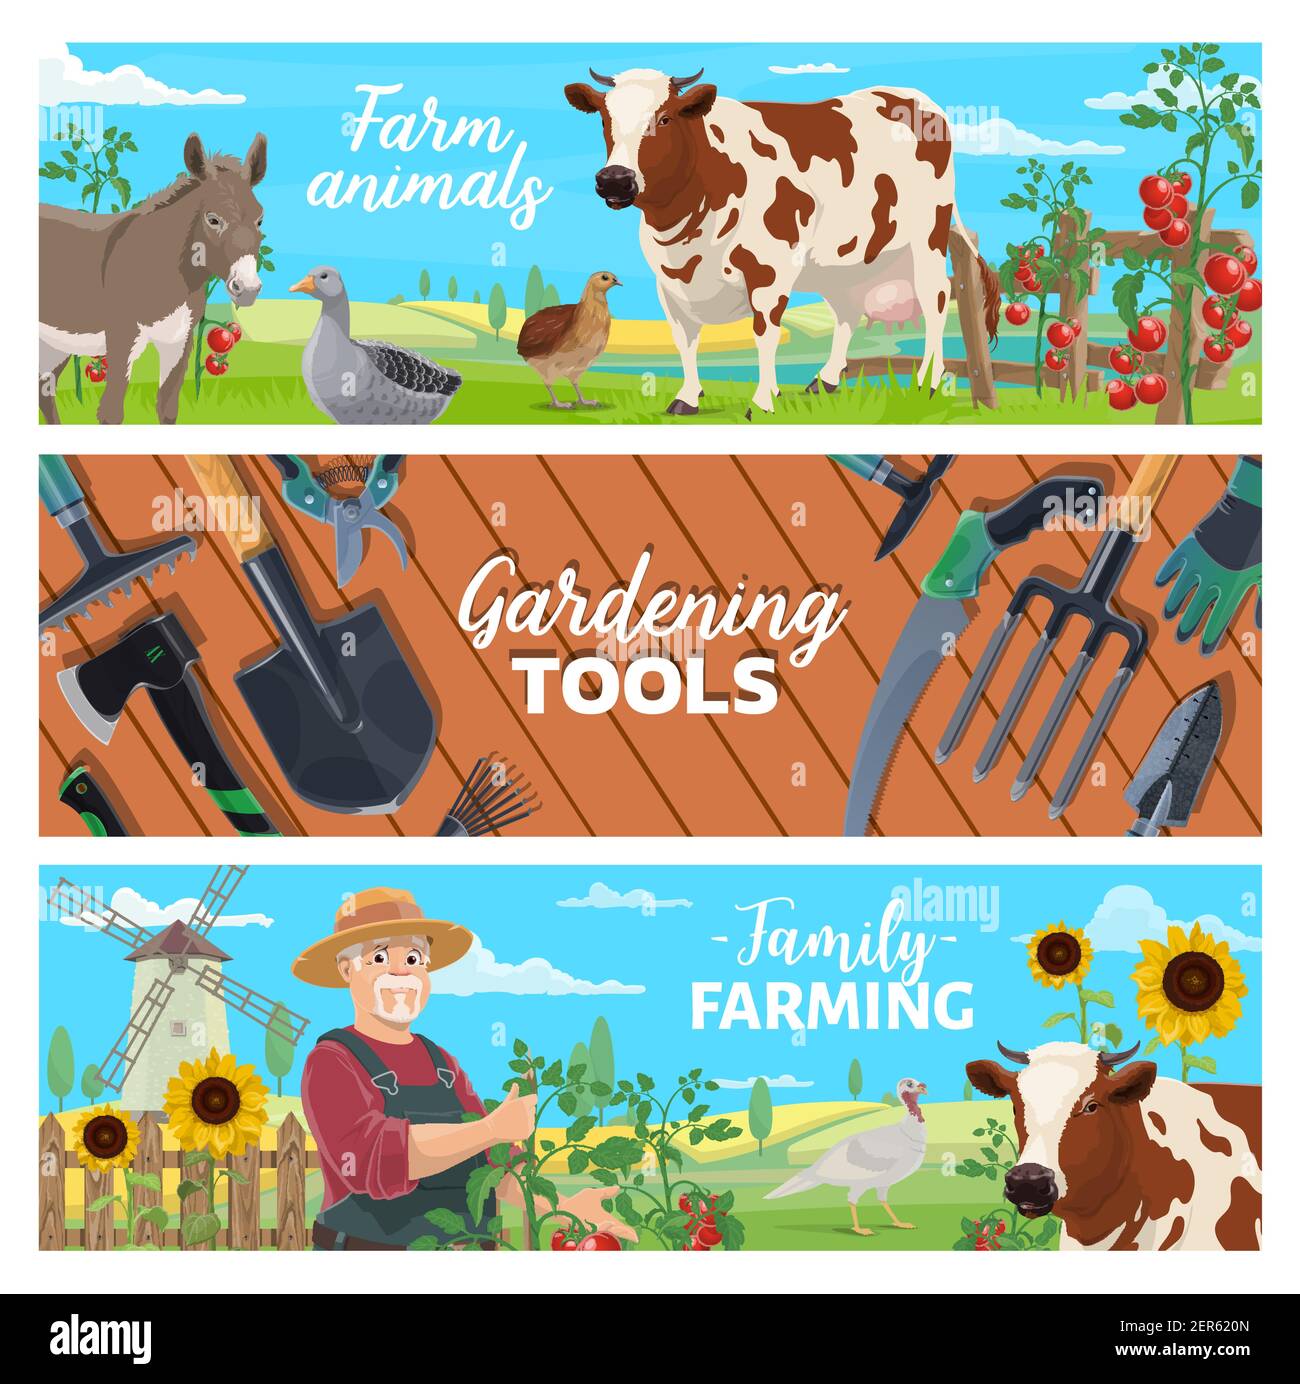 Farm animals, family farming and gardening tool banners. Farm poultry and livestock, vegetables harvest. Farmer growing tomatoes, milk cow and donkey, Stock Vector